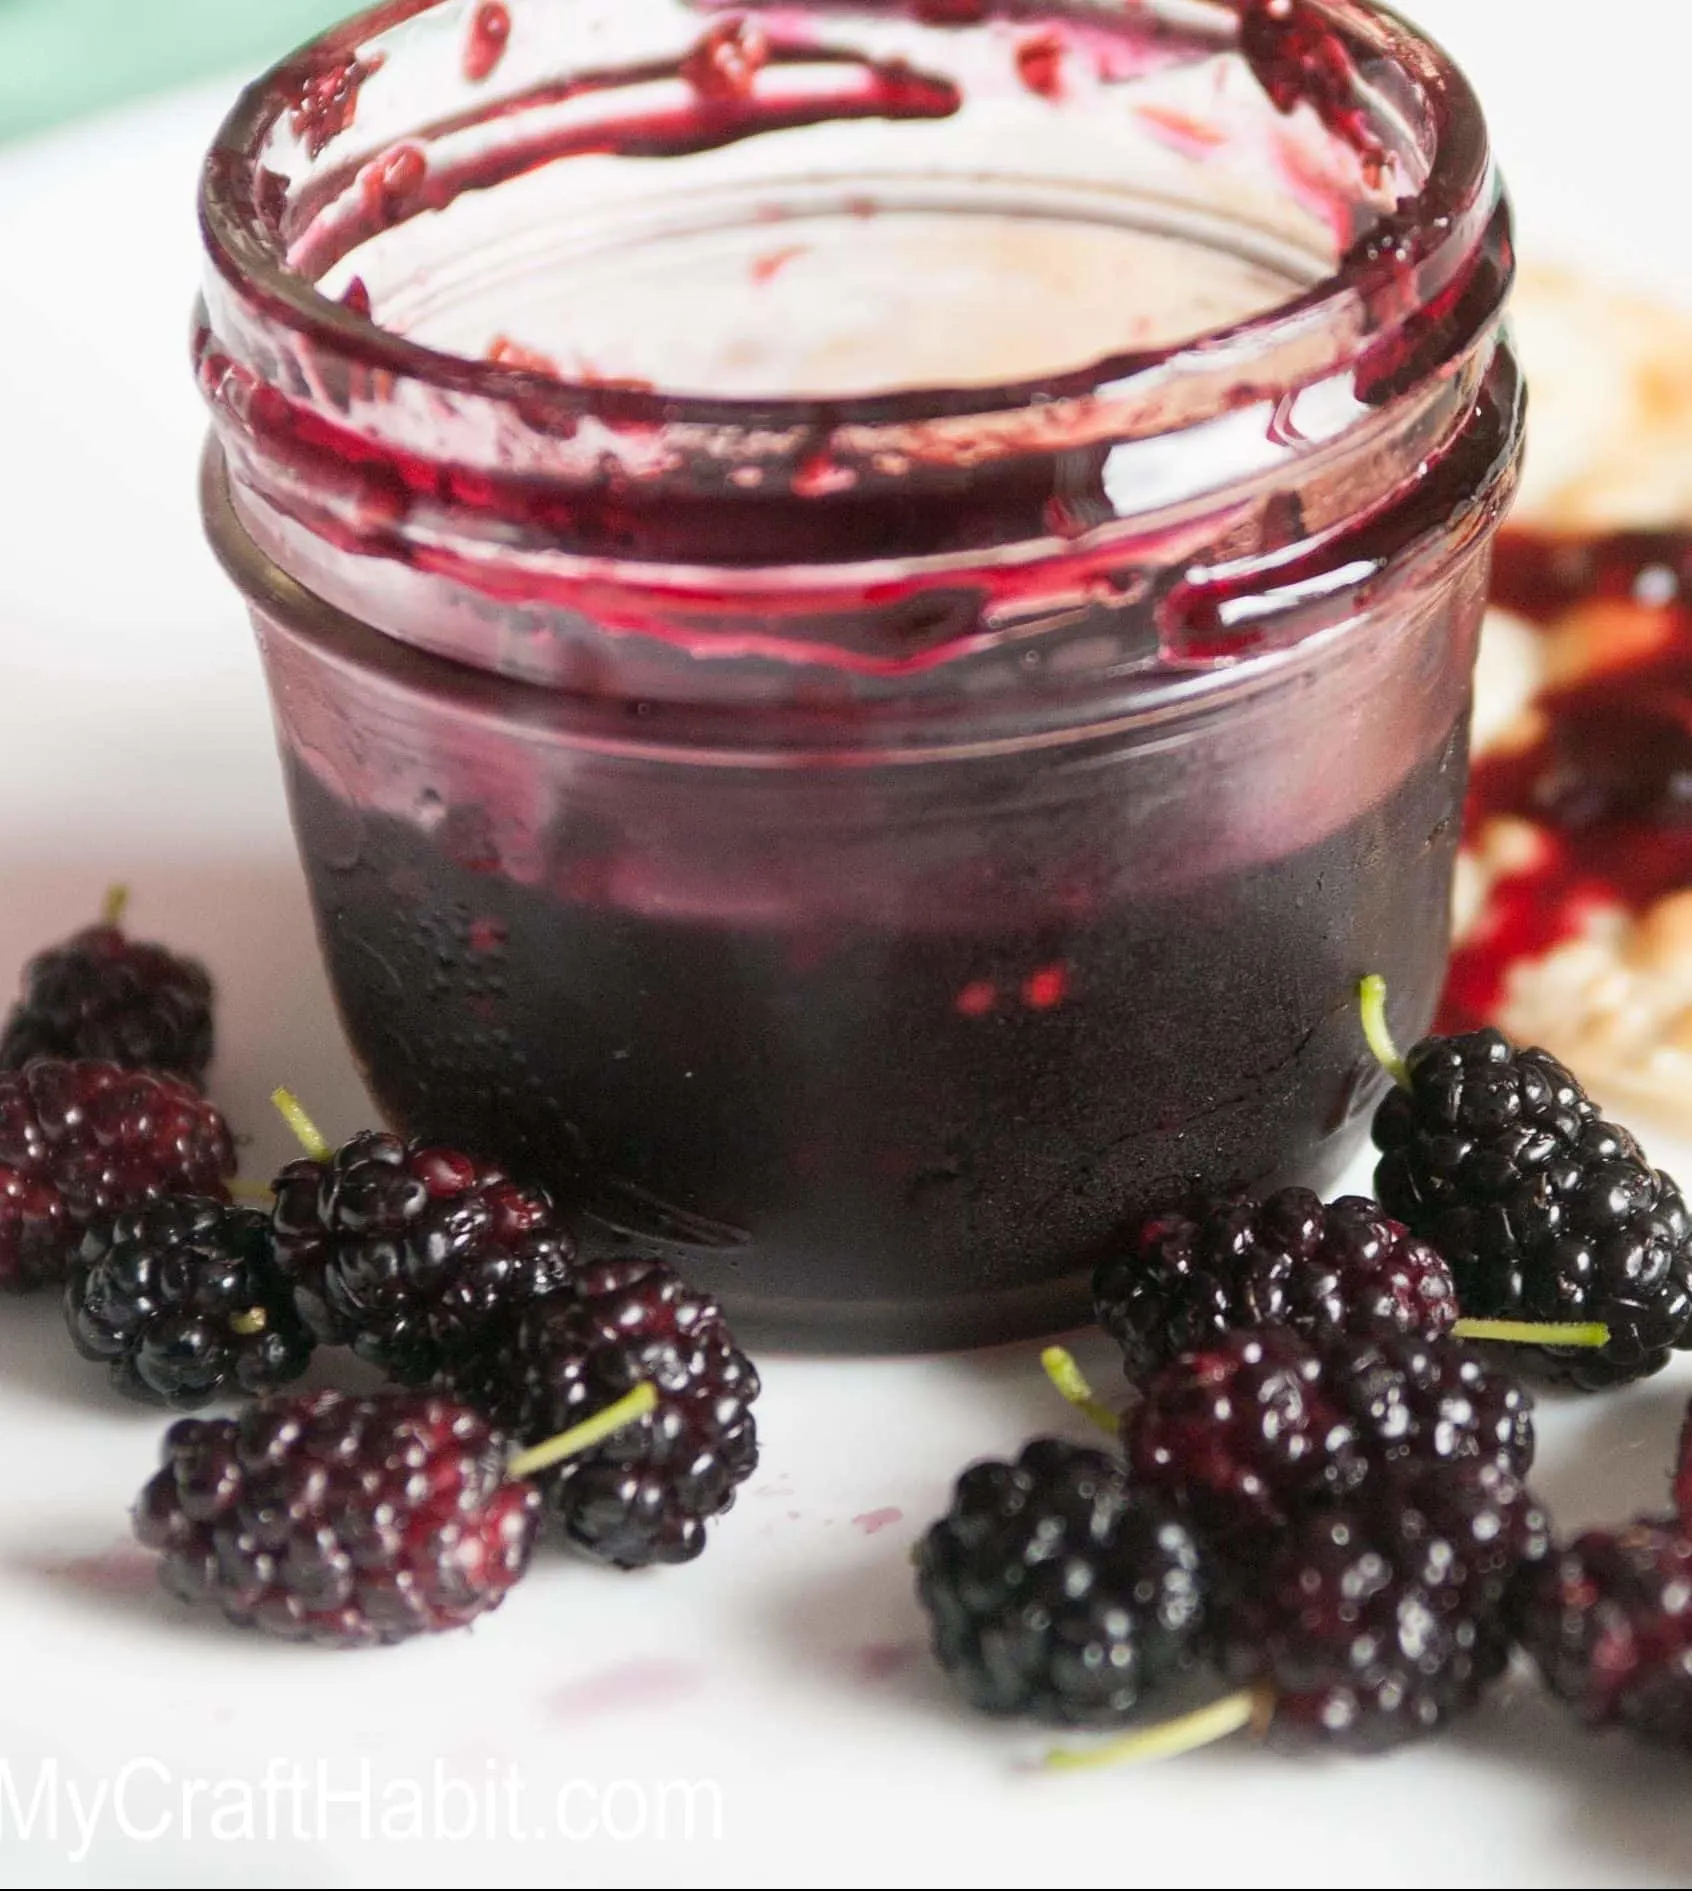 Small canning jar filled with homemade mulberry jam, surrounded by fresh mulberries on a white plate.